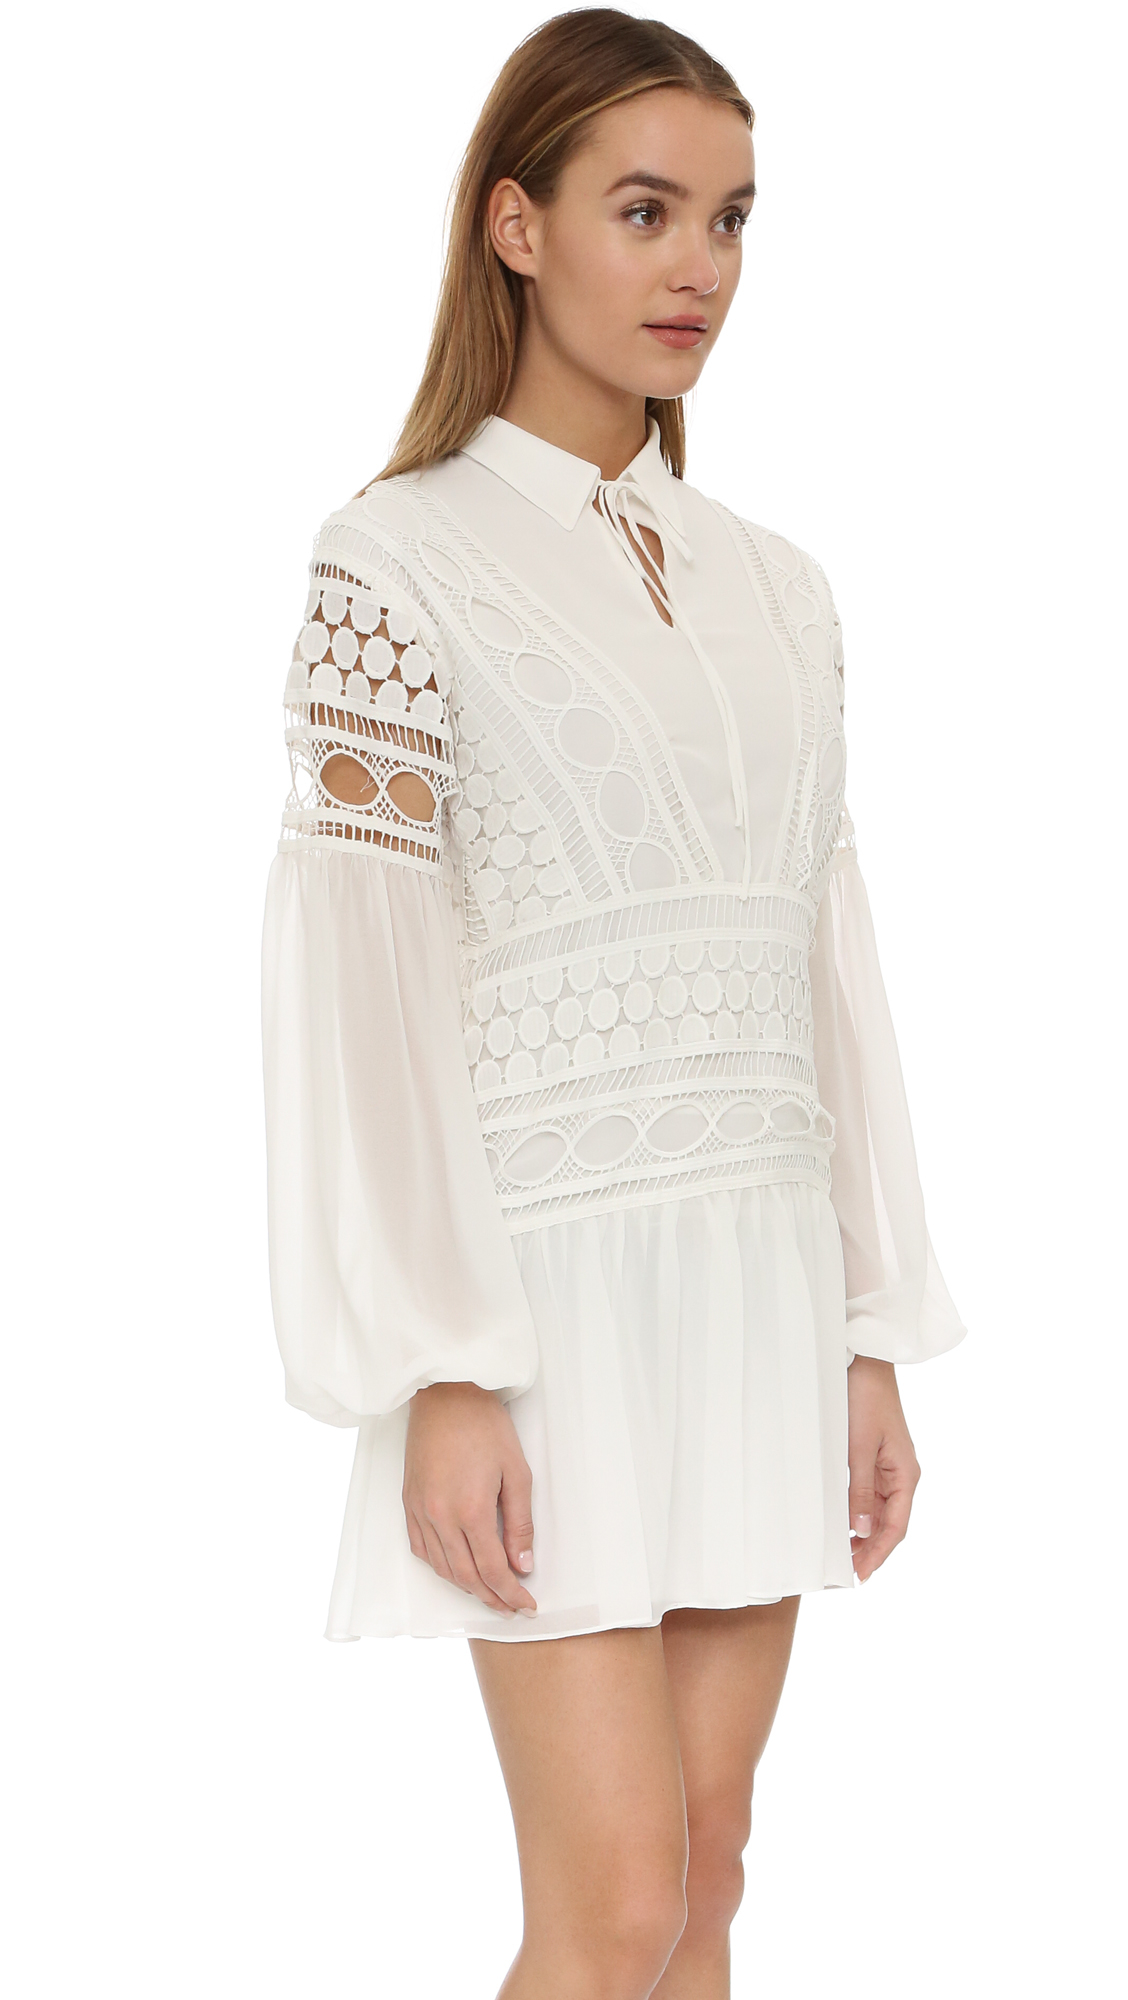 Lyst - Endless Rose Lace Mini Dress in White